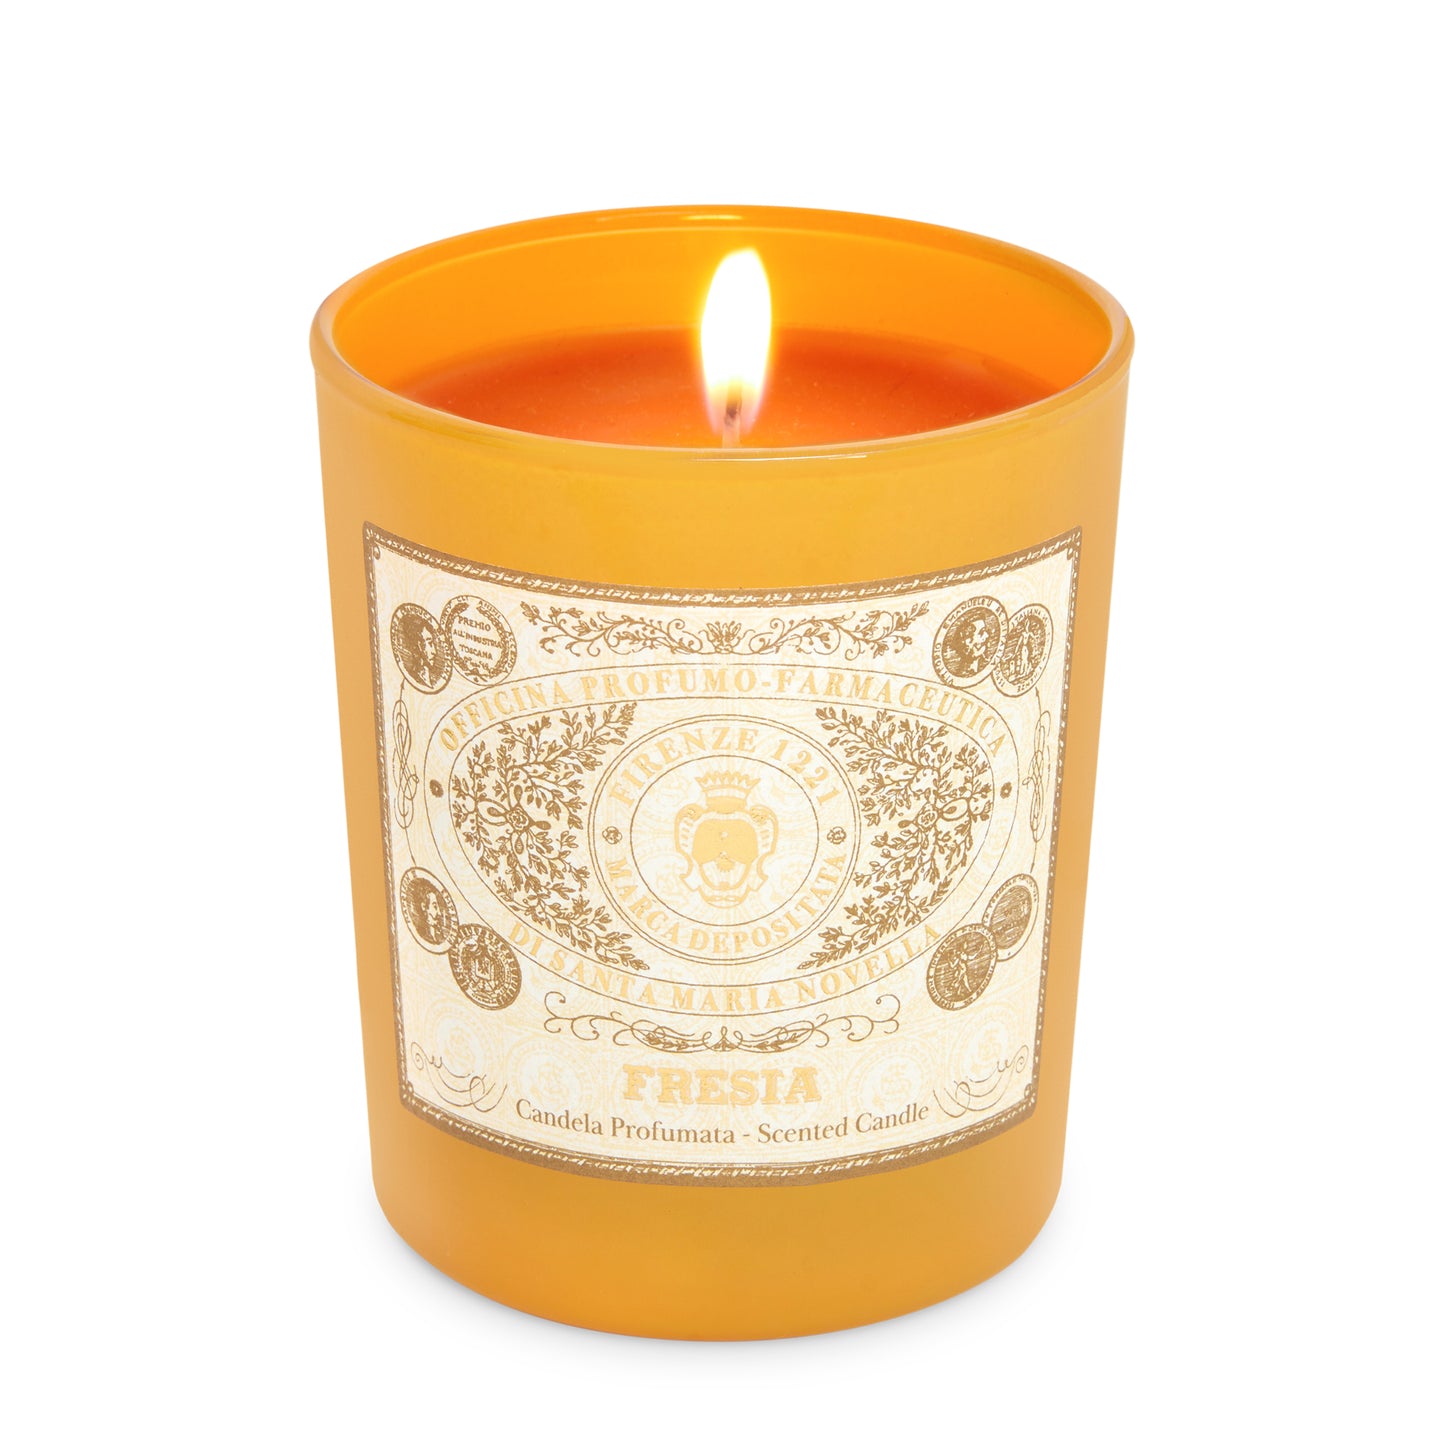 Primary Image of Fresia Scented Candle